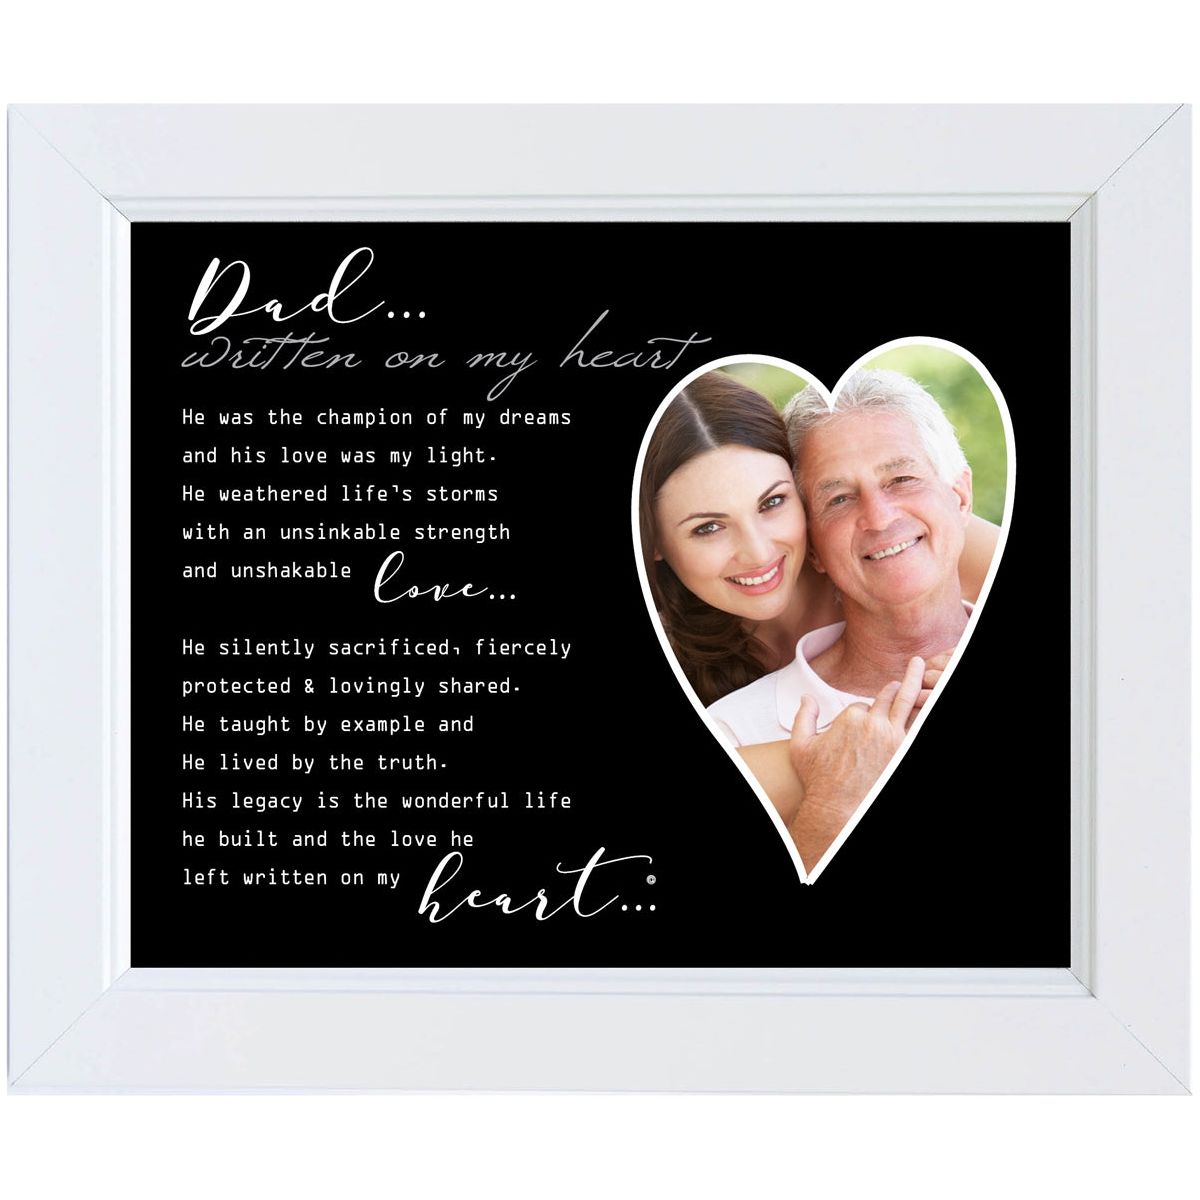 8x10 white frame with &quot; Dad... Written on My Heart&quot; poem and an heart shaped opening for a photograph.